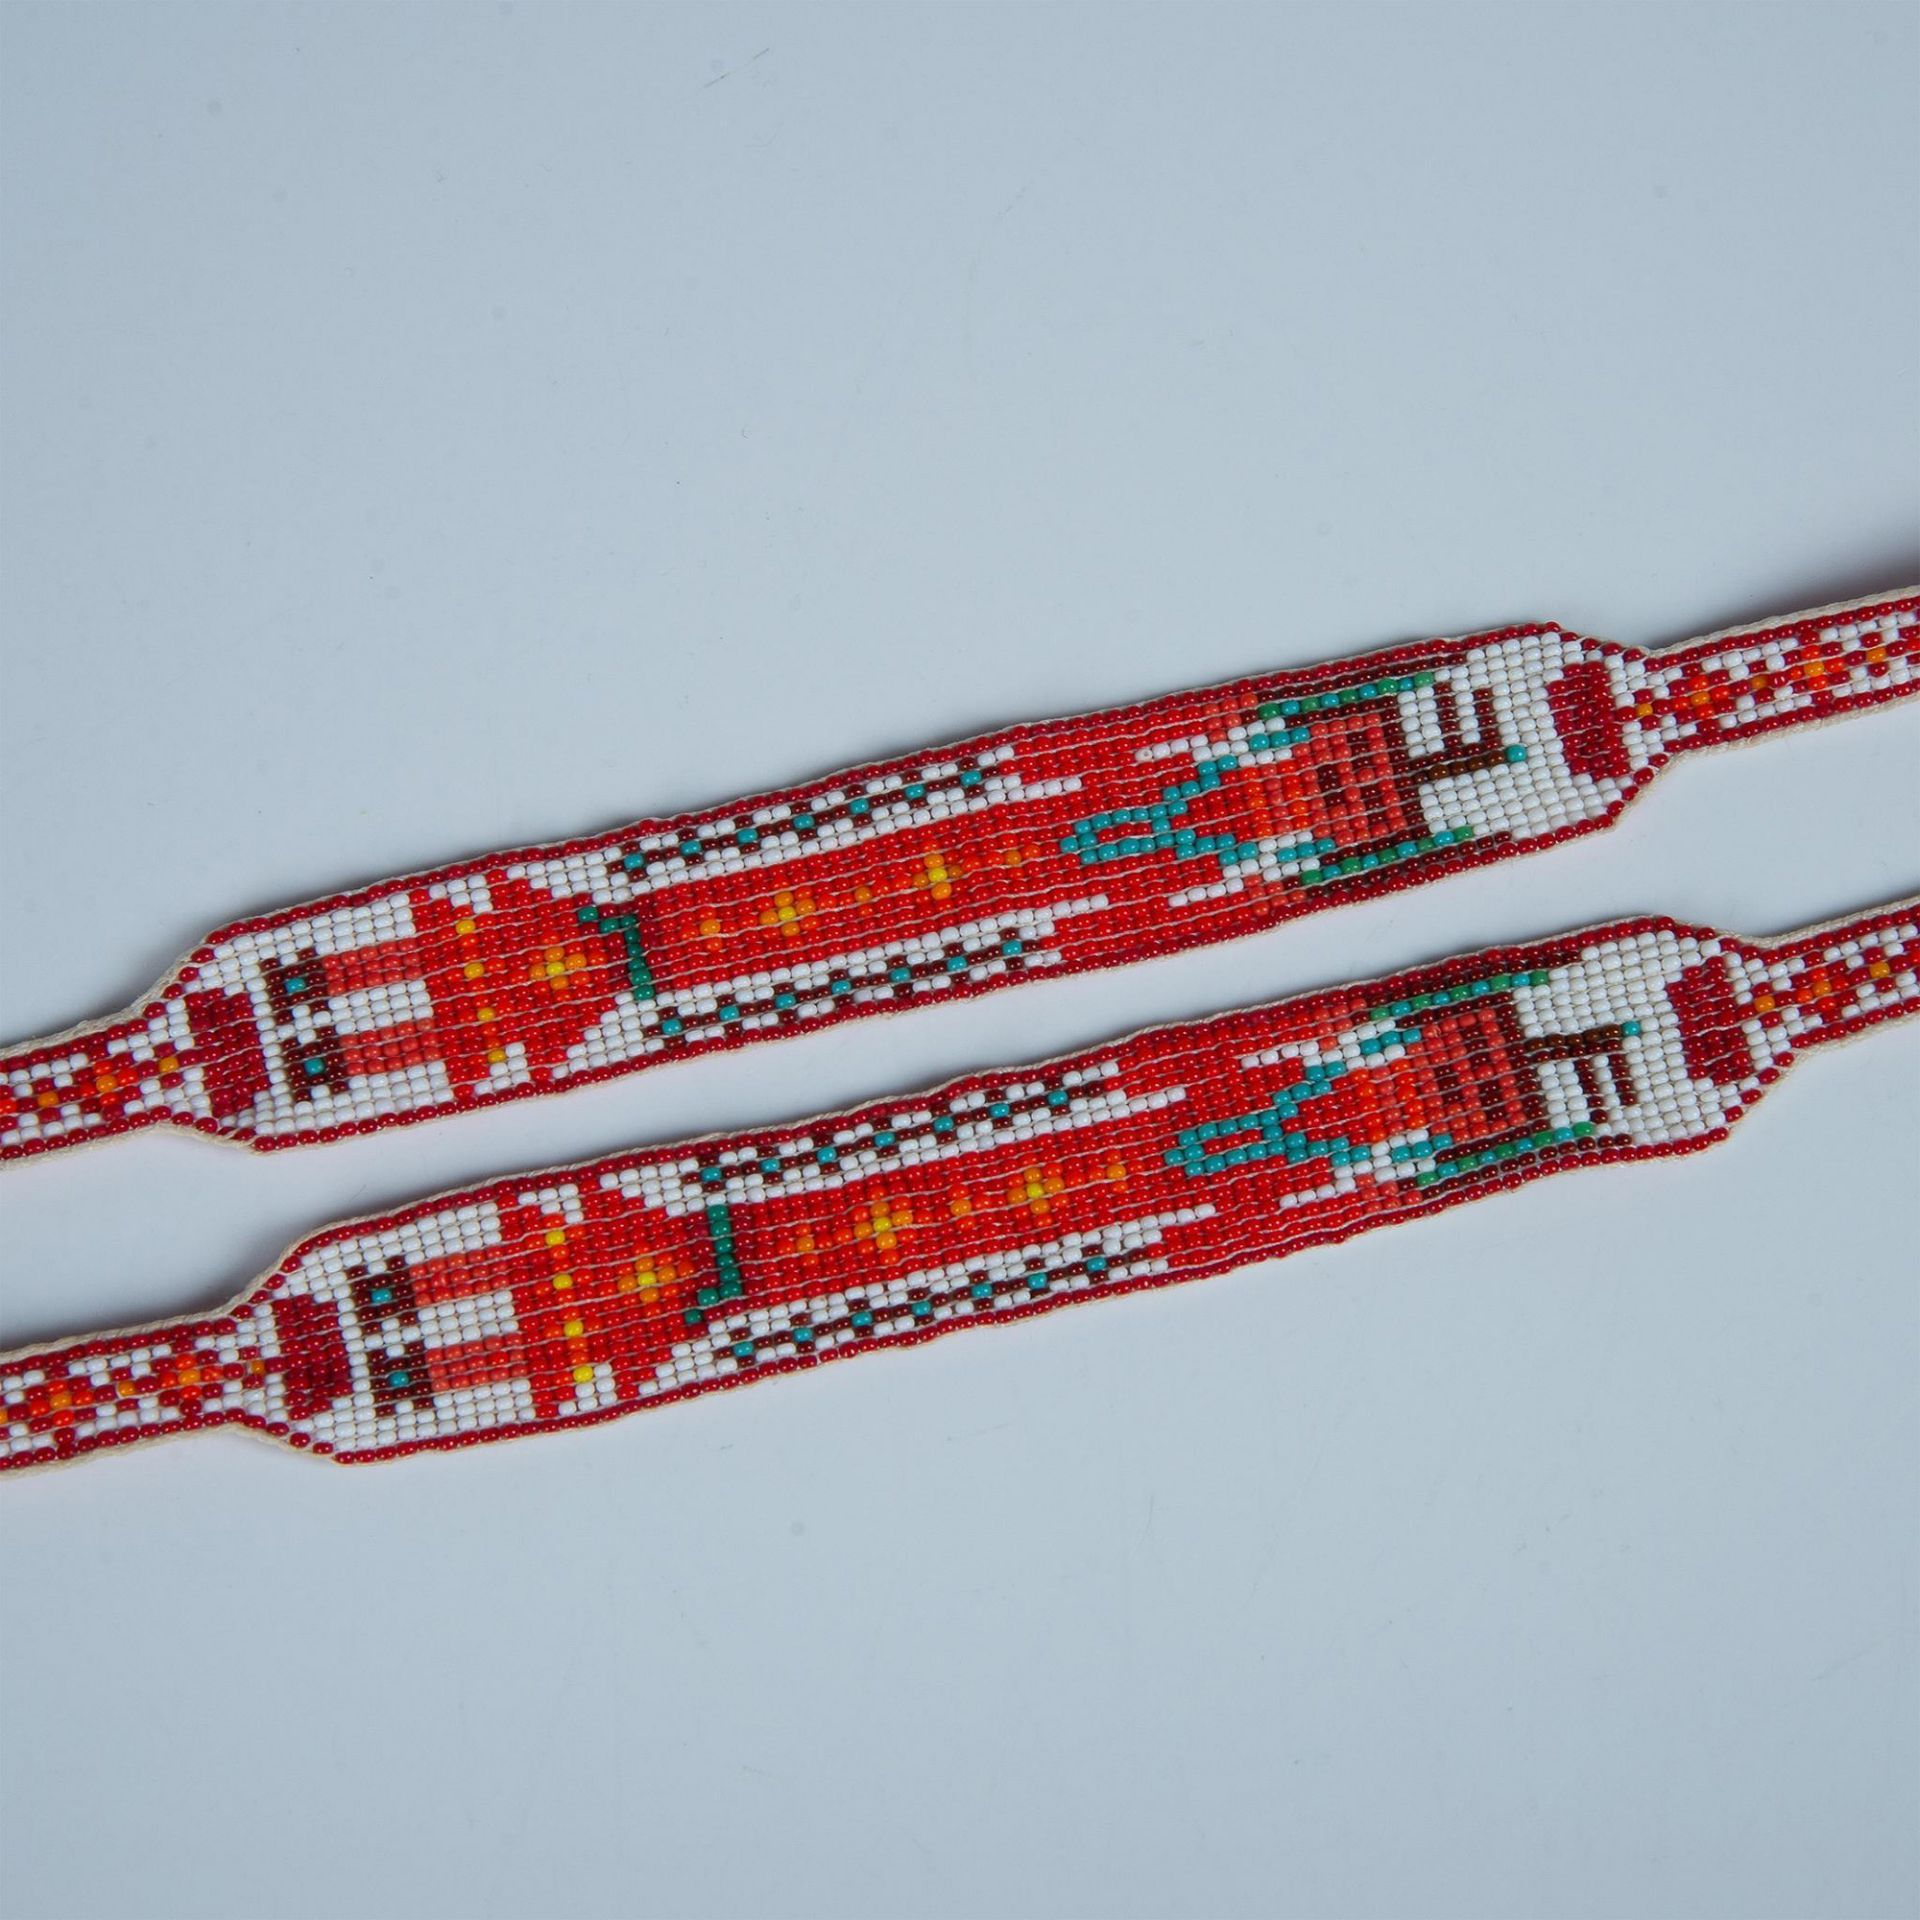 Bold Native American Intricately Hand-Woven Bead Necklace - Image 4 of 4